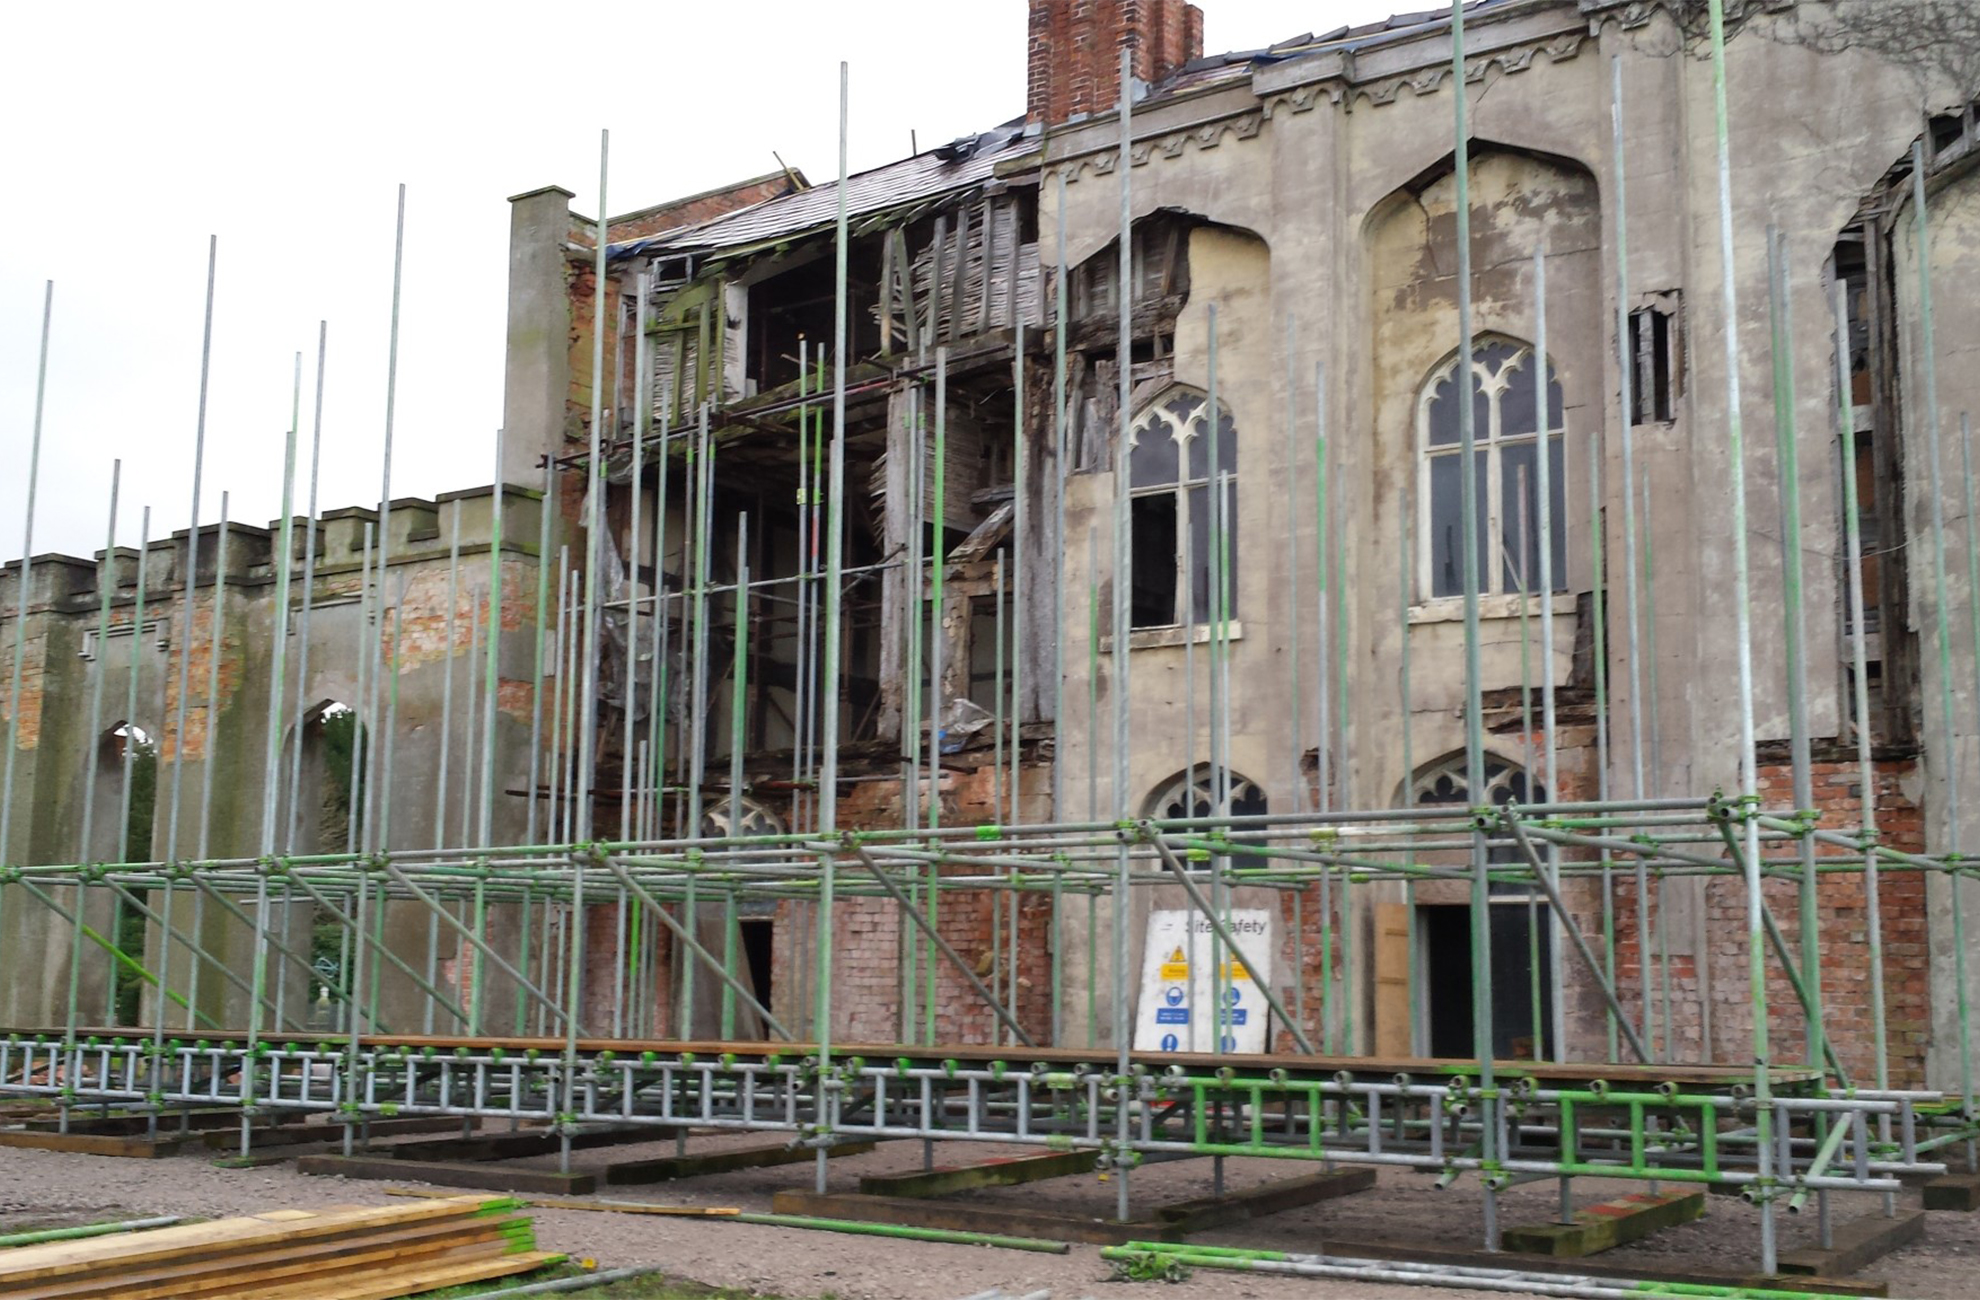 The North Wing at Combermere Abbey being restored